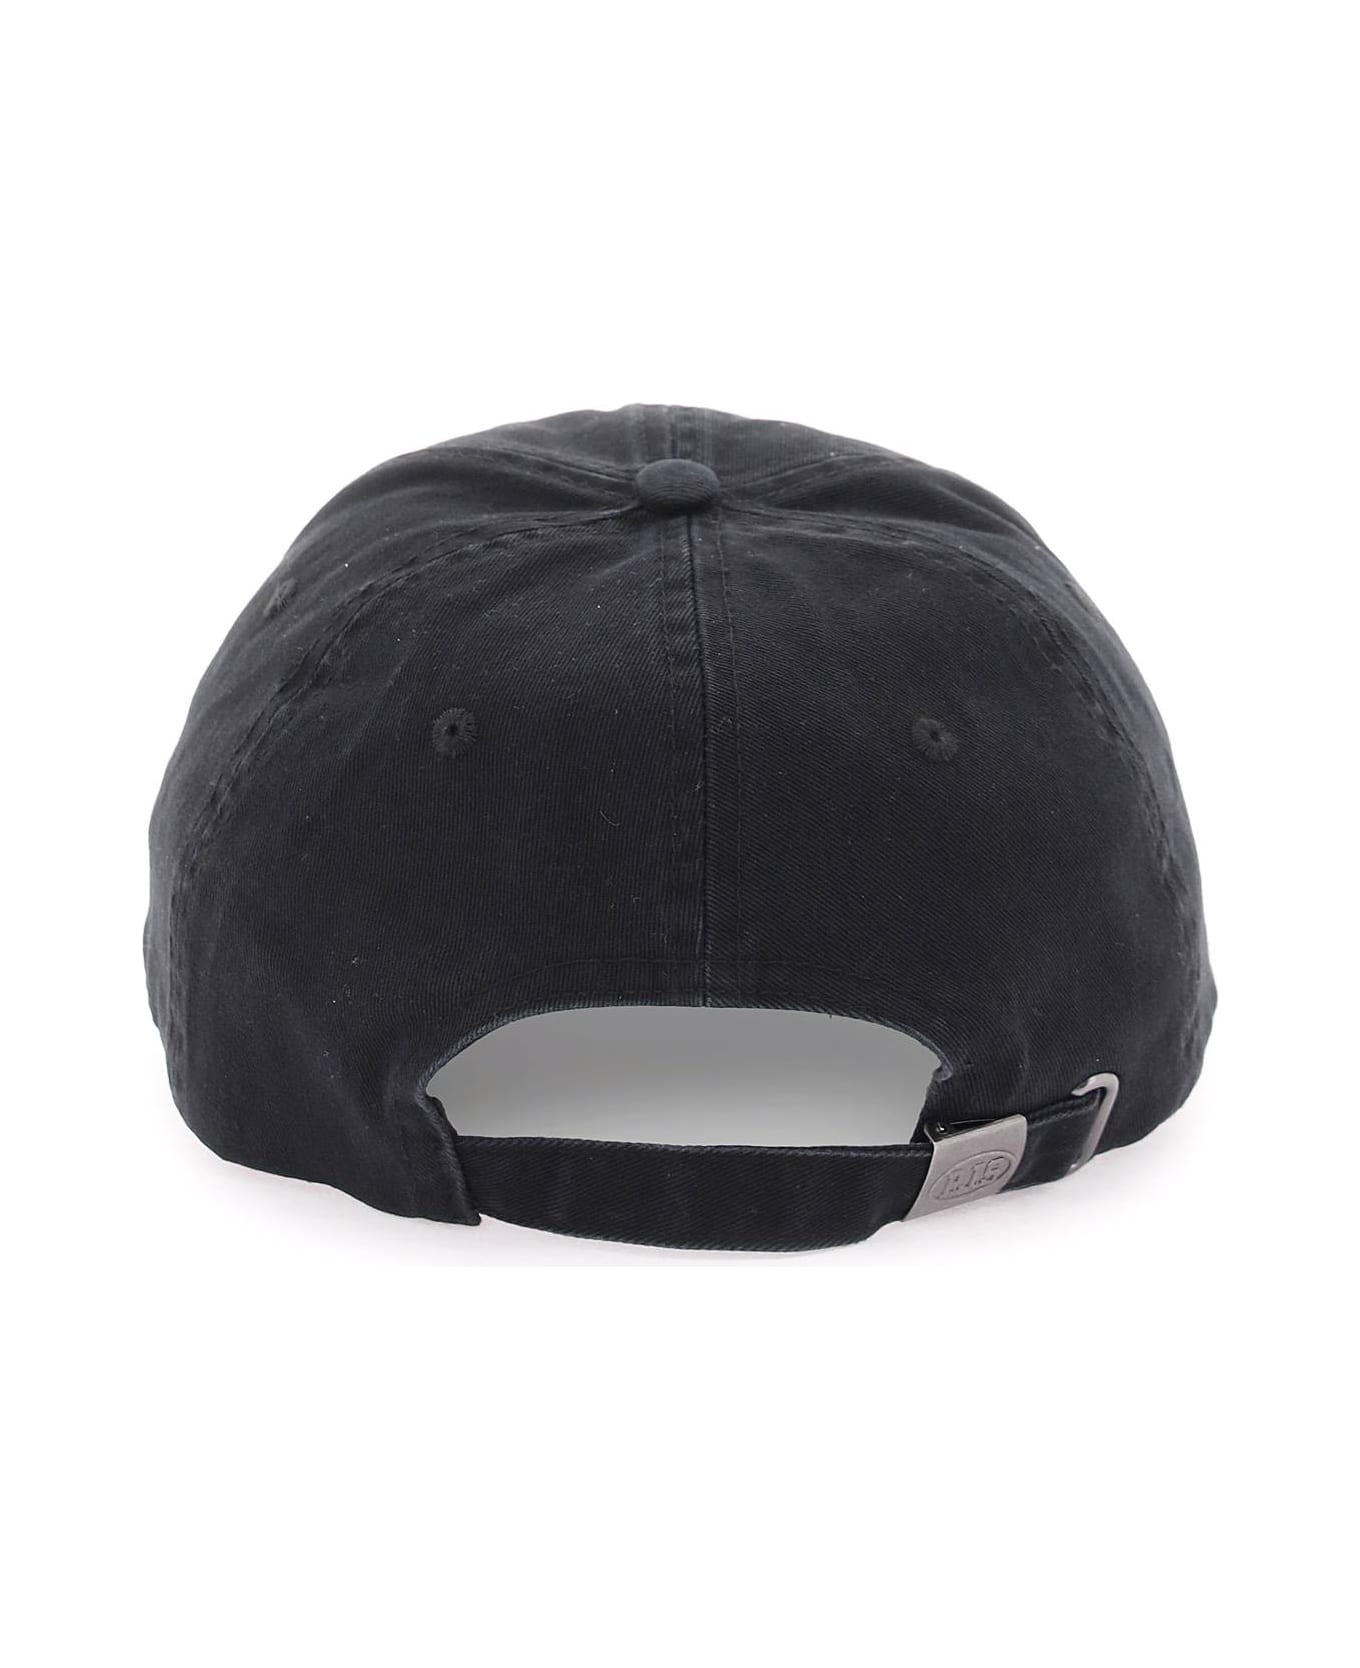 Parajumpers Baseball Cap With Embroidery - BLACK (Black)